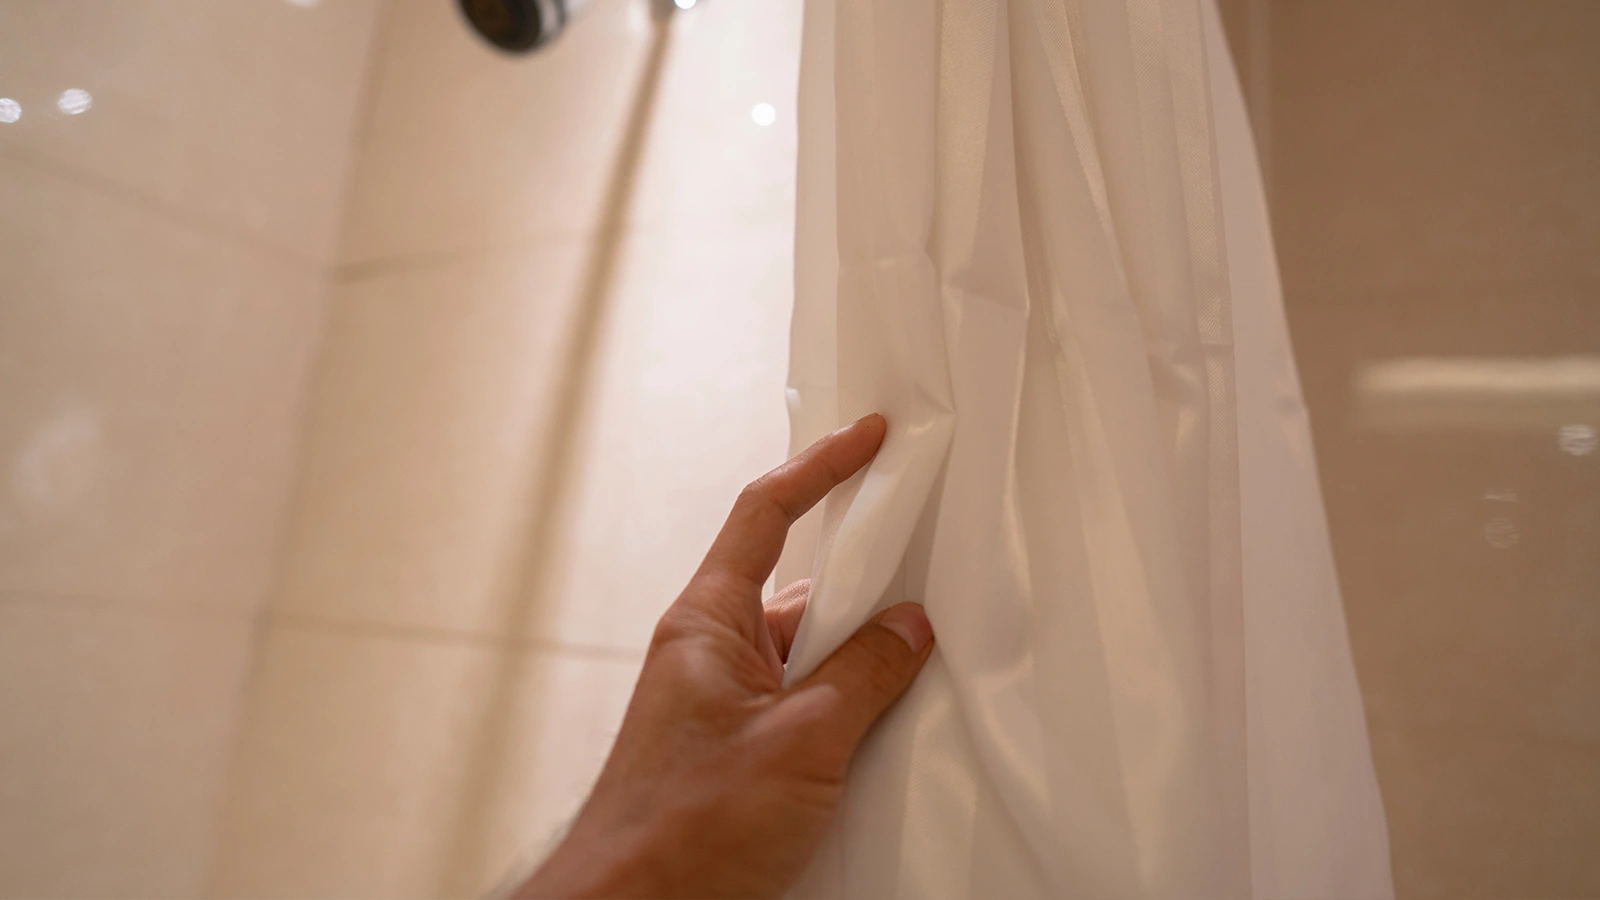 A person holding a white shower curtain and demonstrating how to keep it closed effectively.